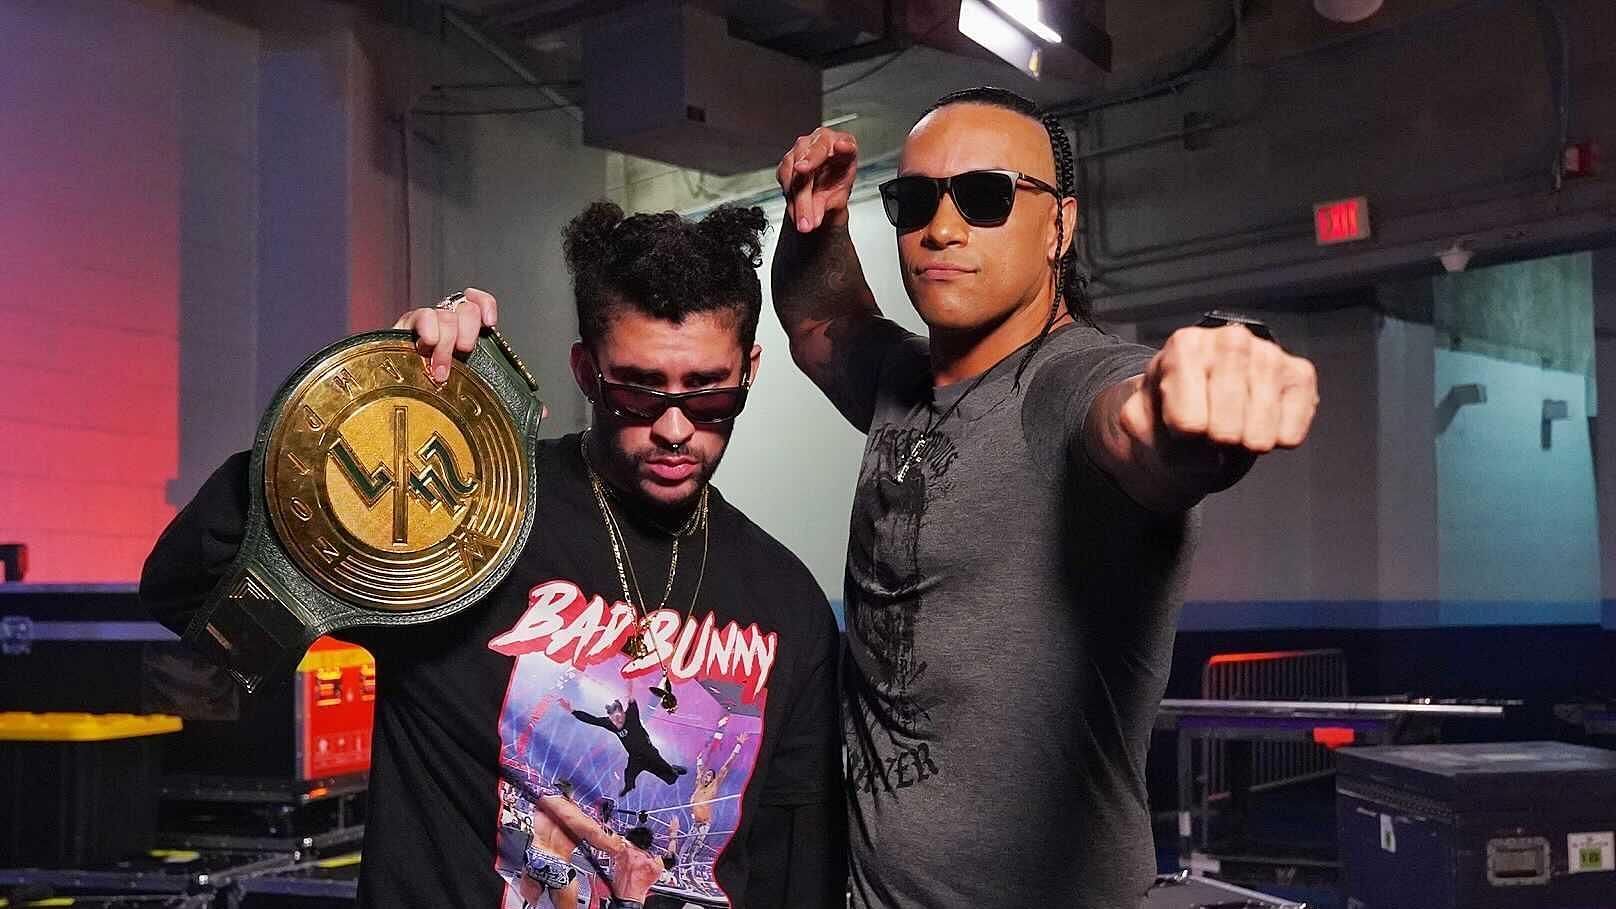 Bad Bunny (left) with Damian Priest (right)